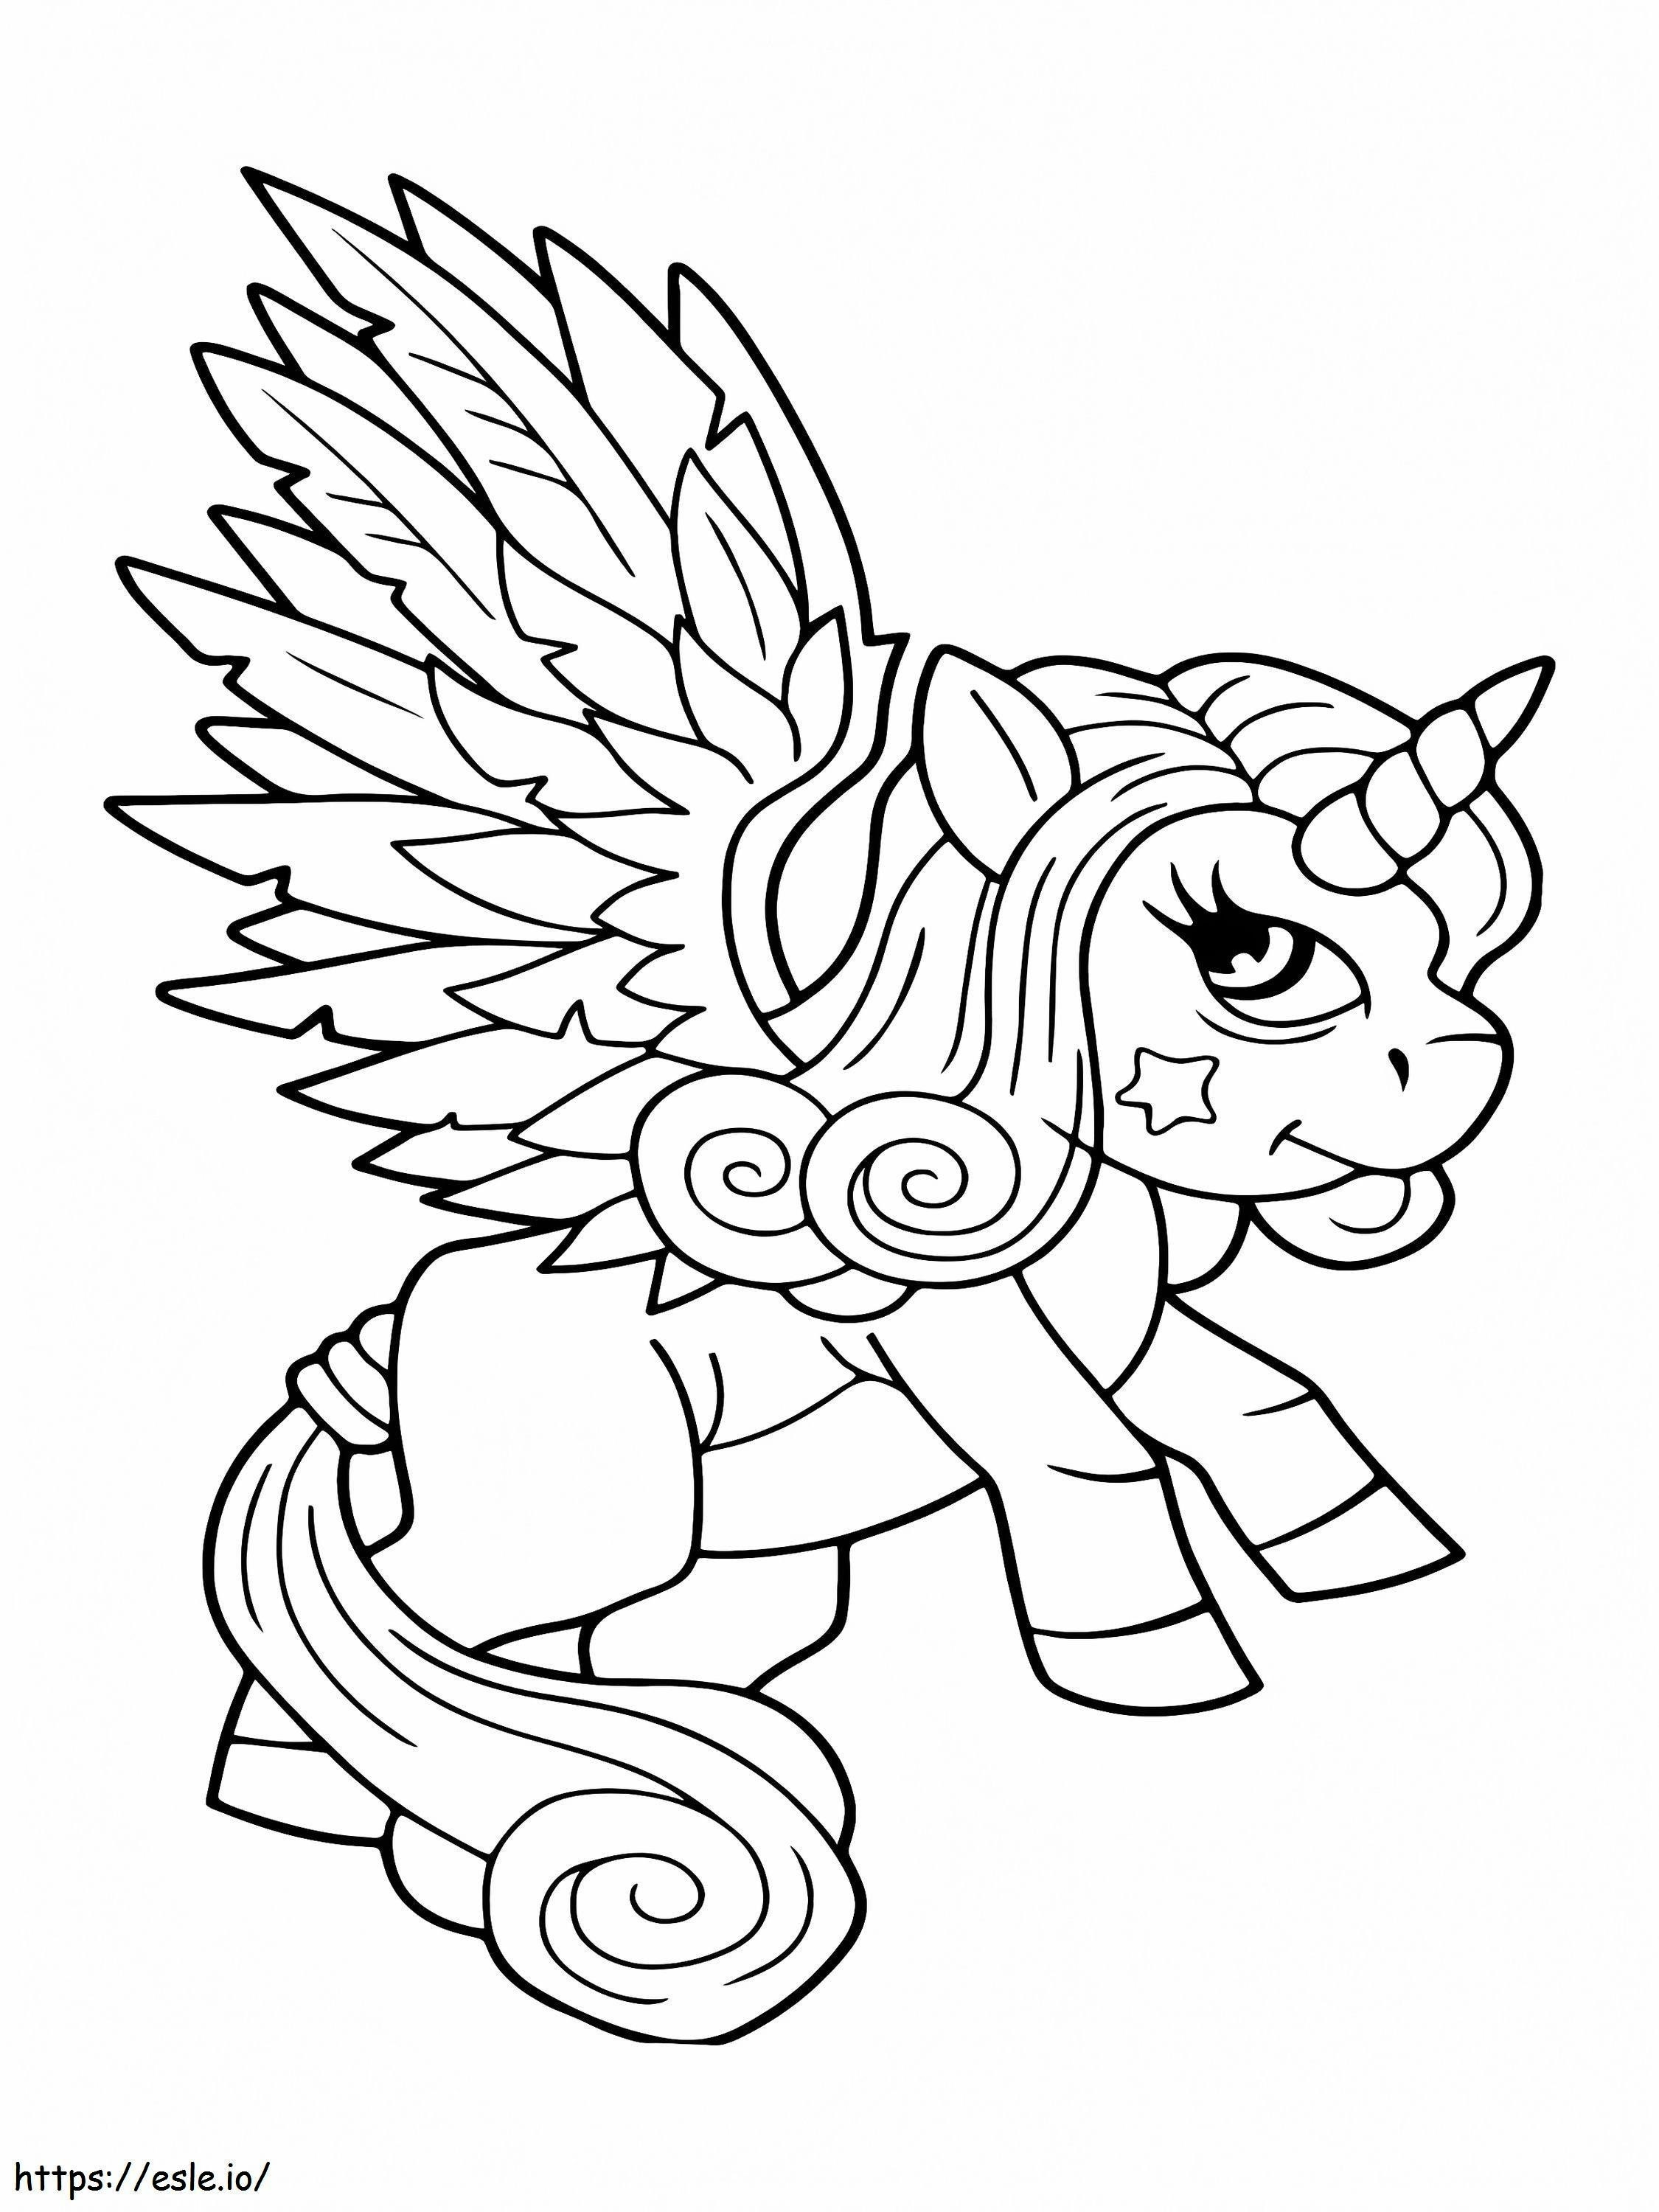 Winged Alicorn coloring page